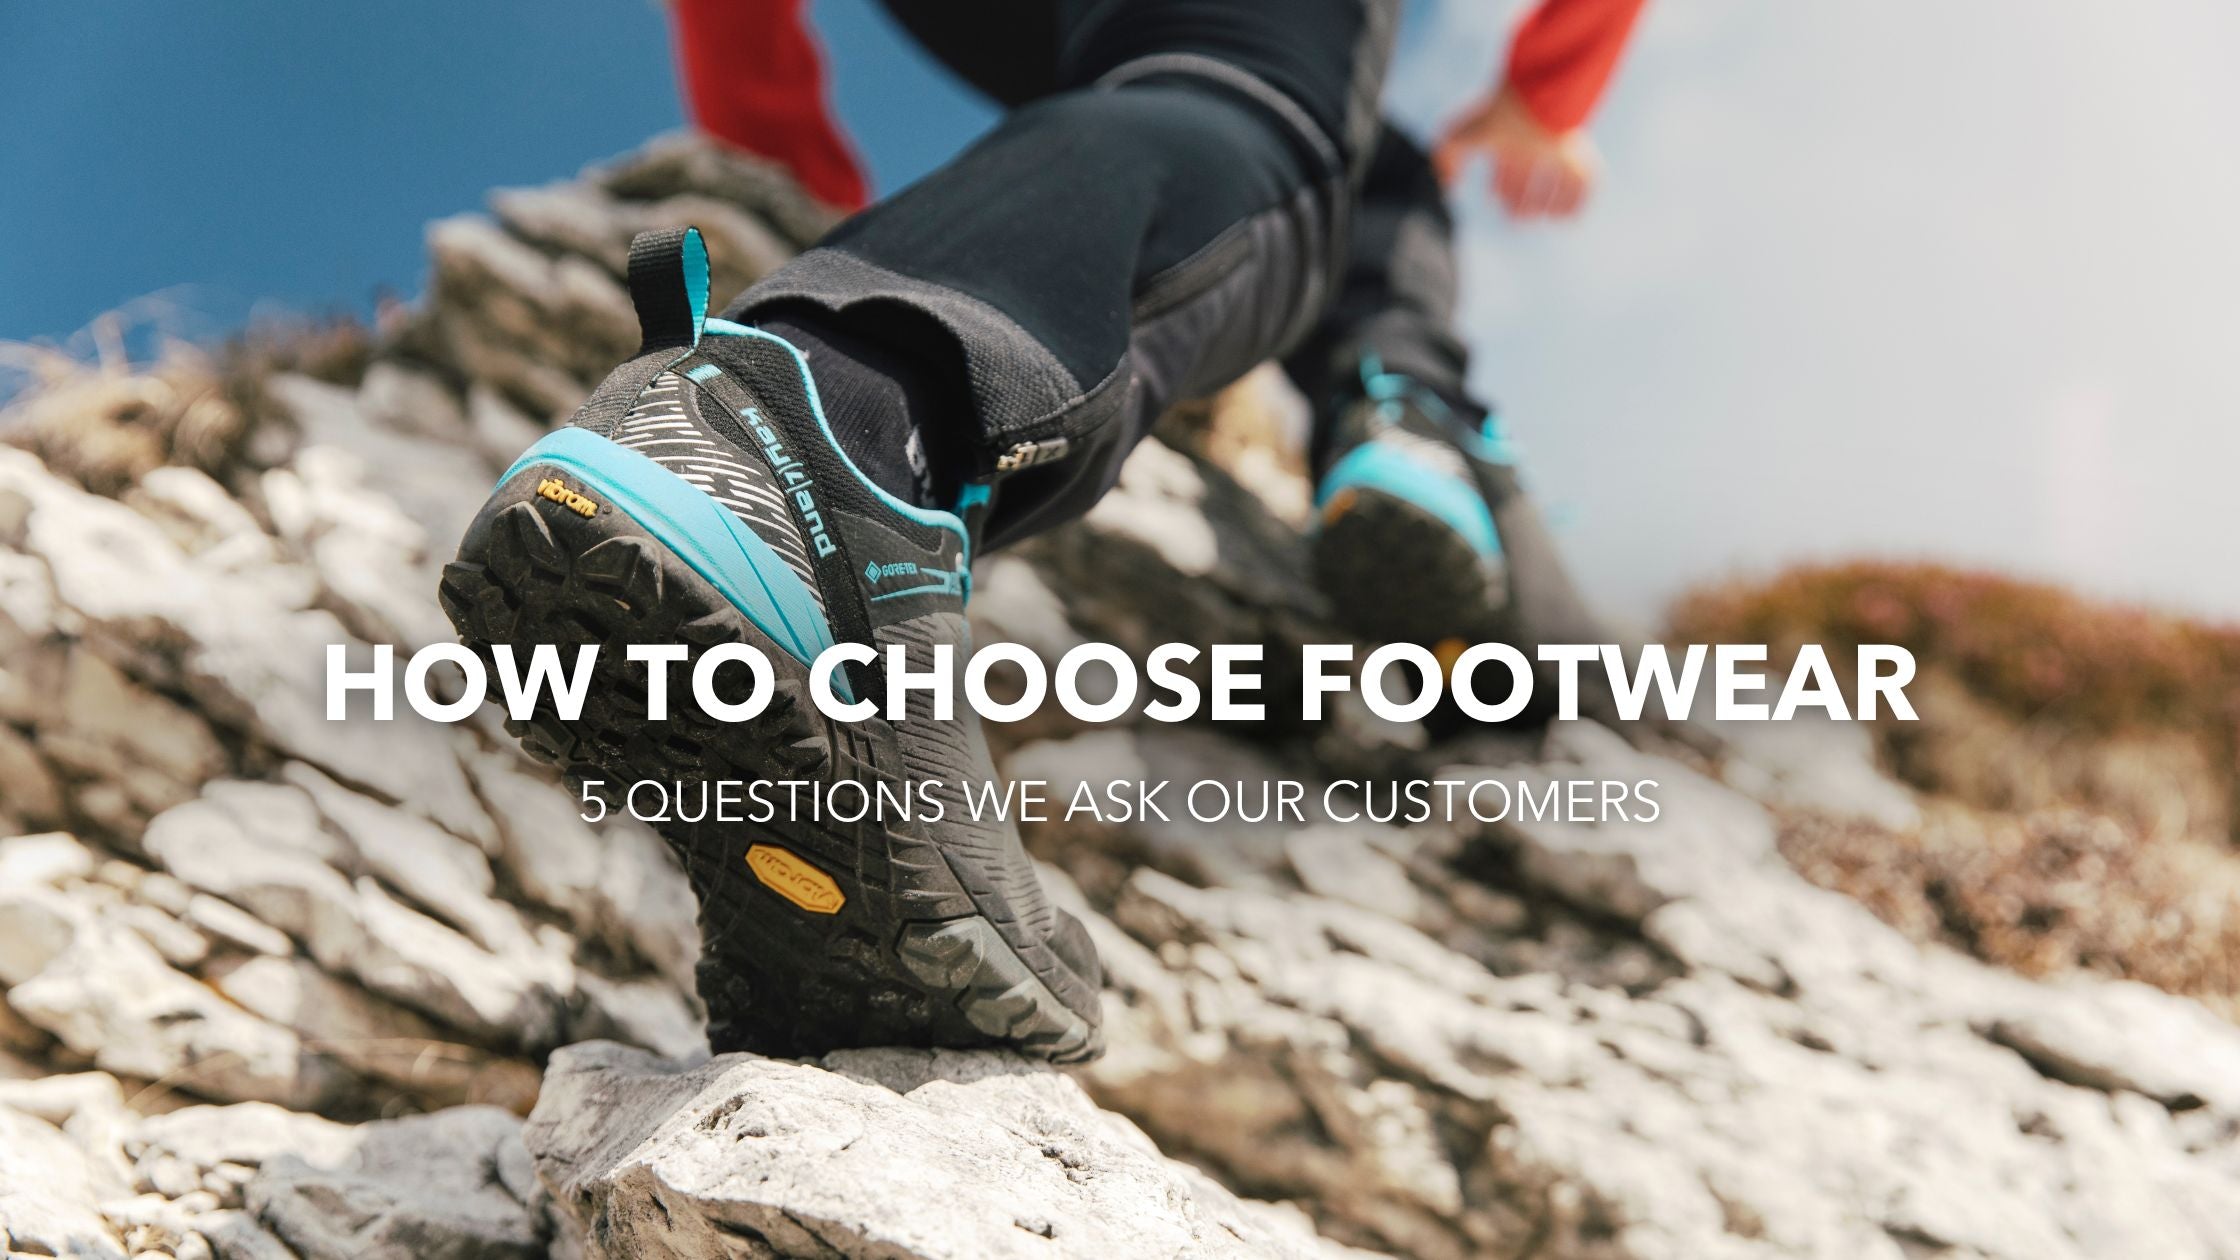 How to choose the right footwear for hiking and trail running in Ireland